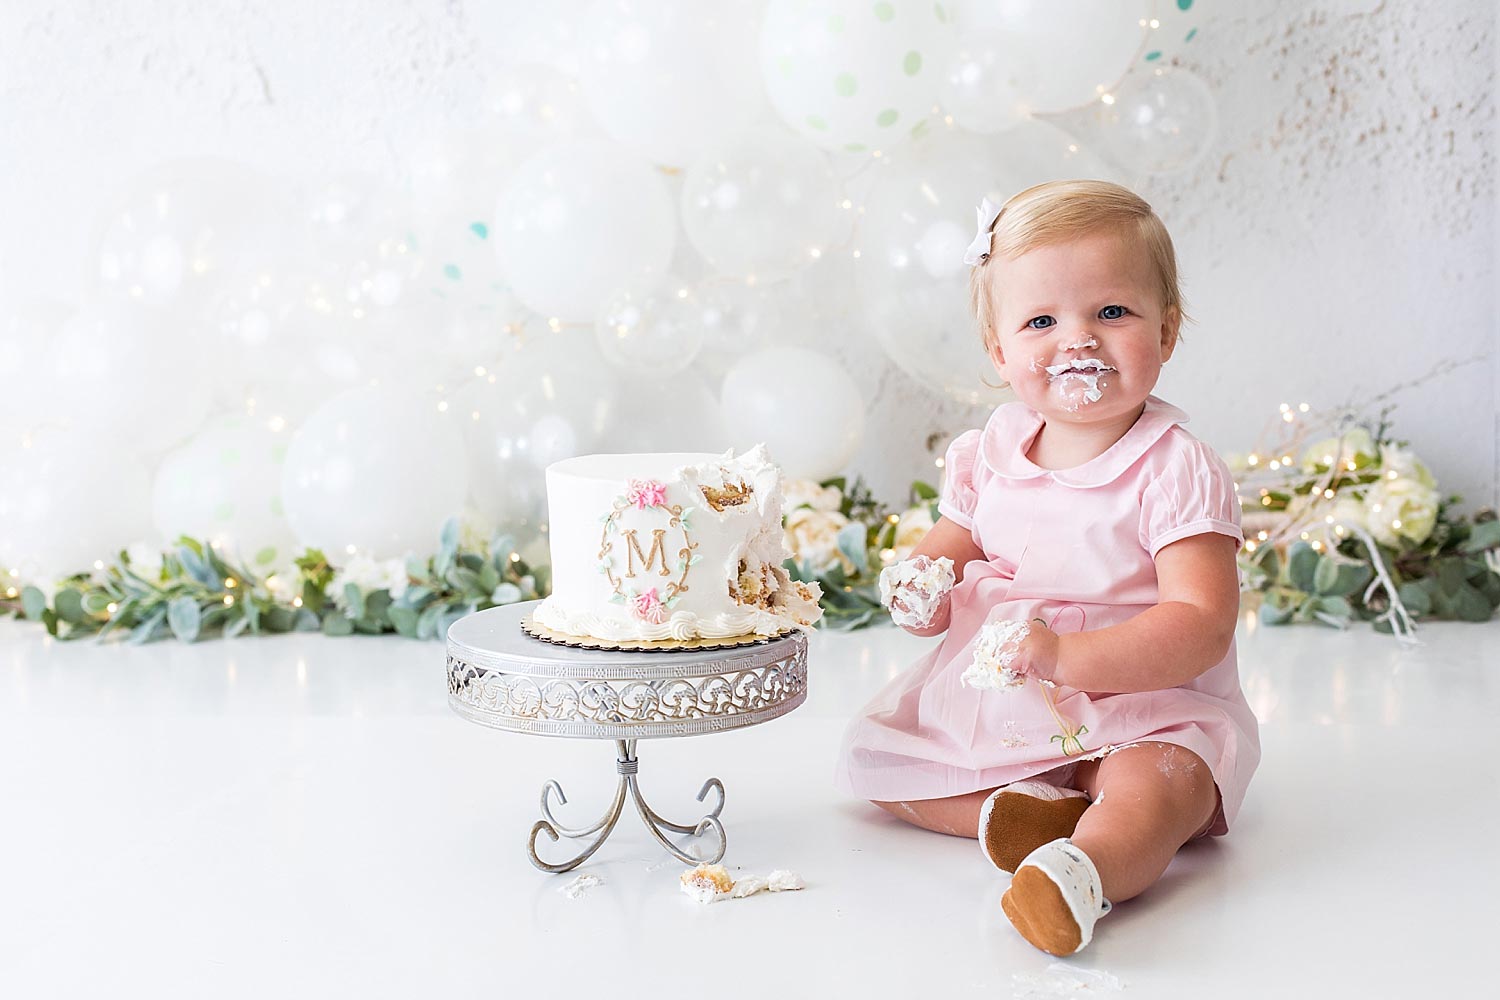 One-year-old girl in pink dress smiles with cake smashed on her face